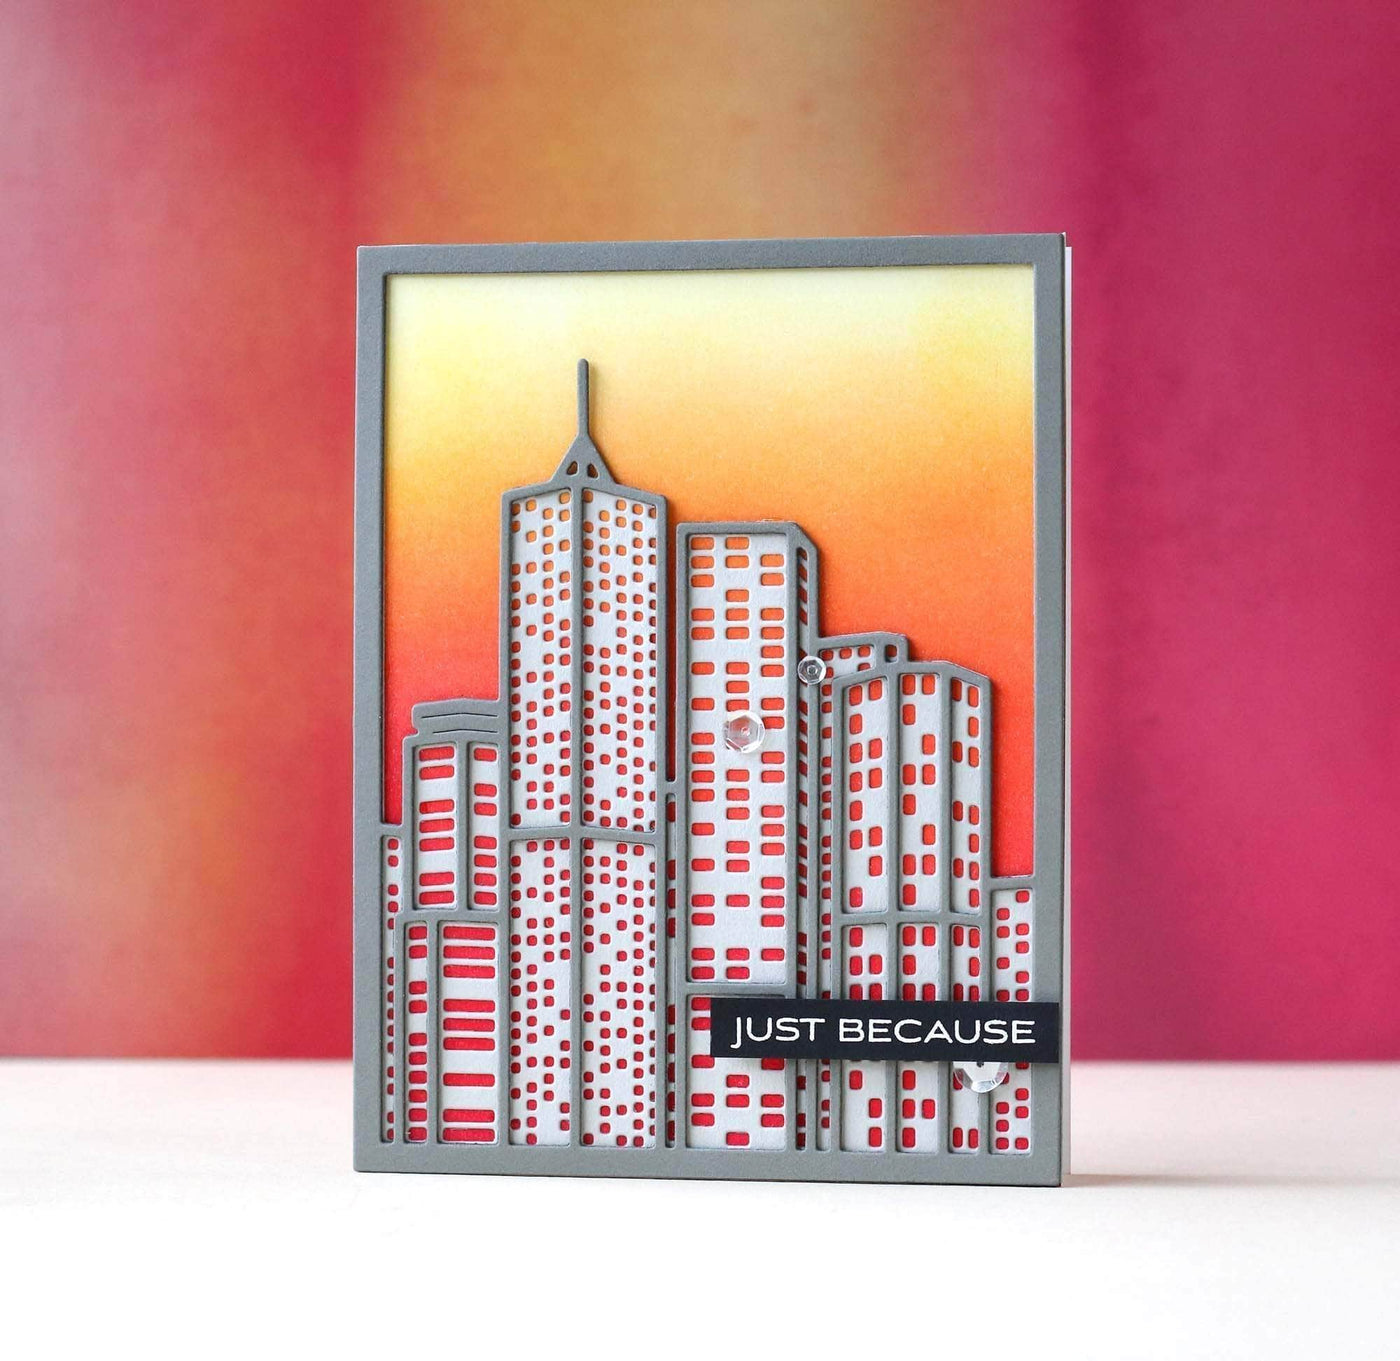 Dies Layered Cityscape Cover Die B